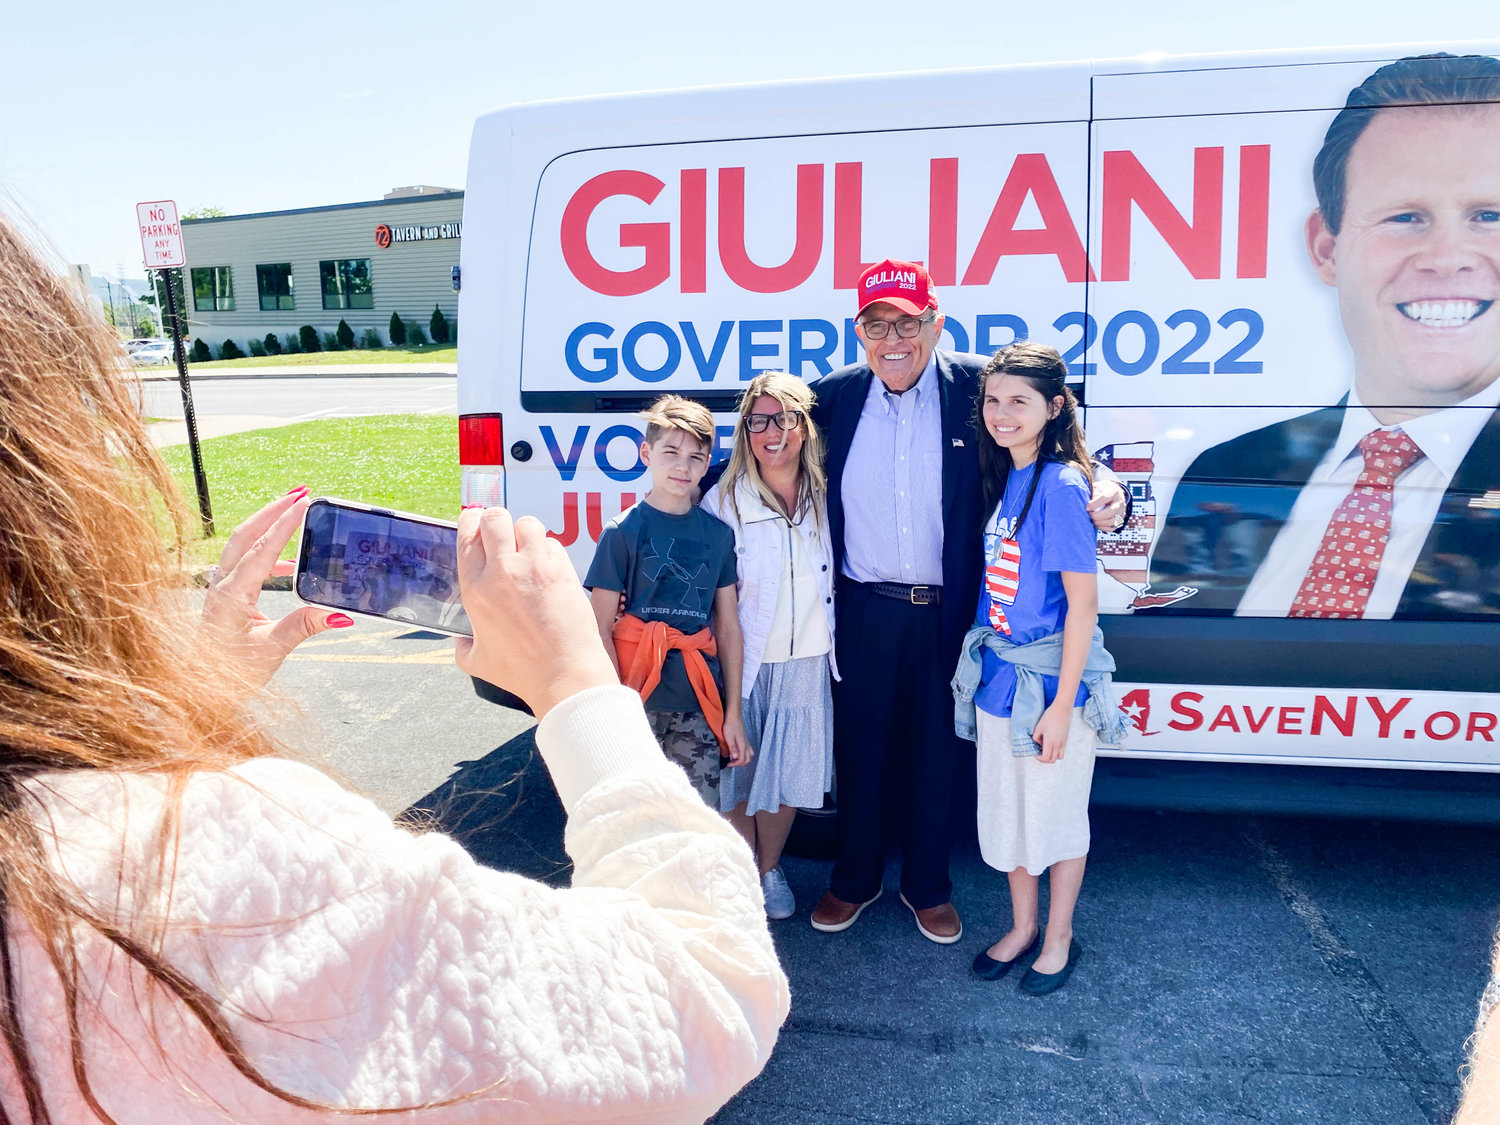 Some Mohawk Valley residents take the opportunity to get photos with Rudy Guiliani, former New York City mayor and lawyer for former President Donald J. Trump.